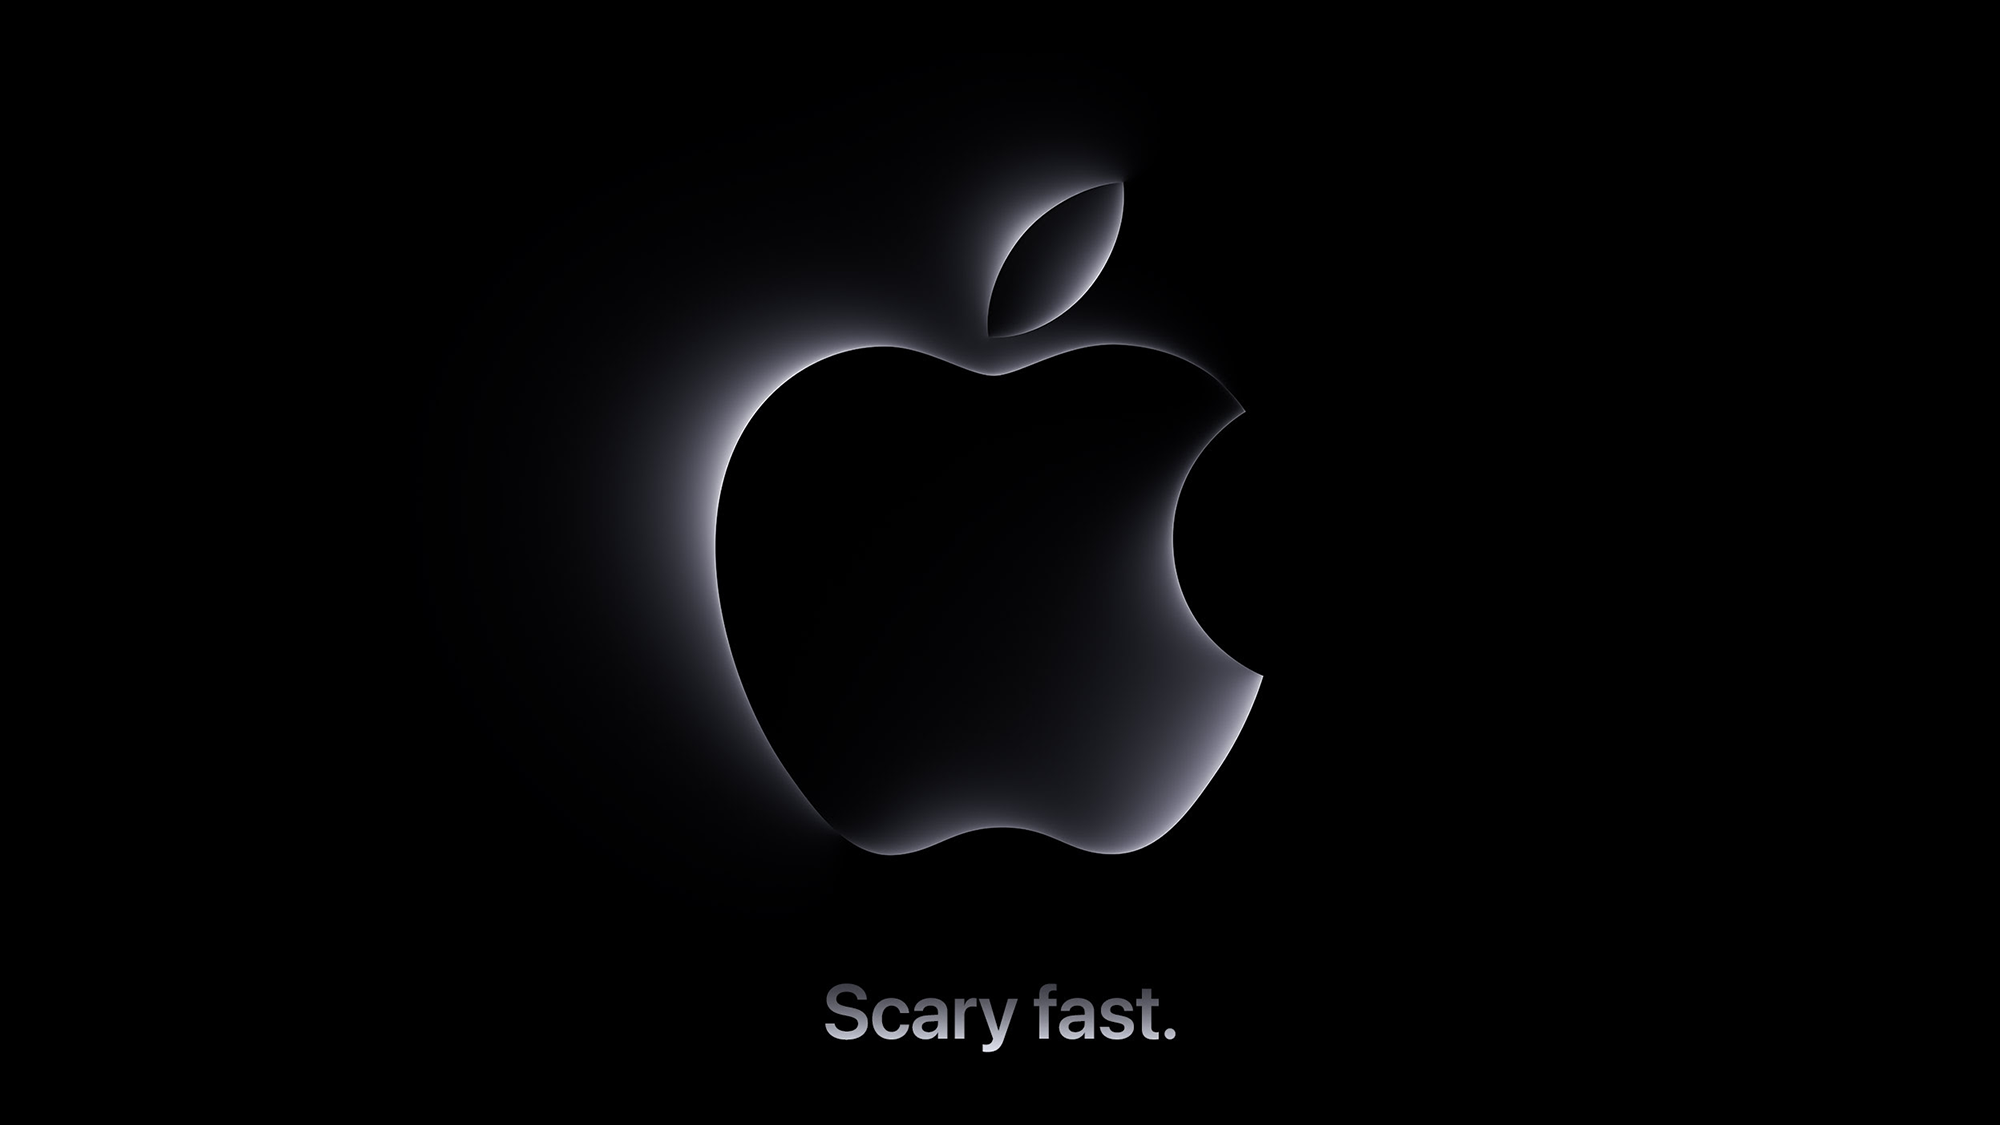 Apple’s Scary Fast October Mac Event: How To Watch And What To Expect